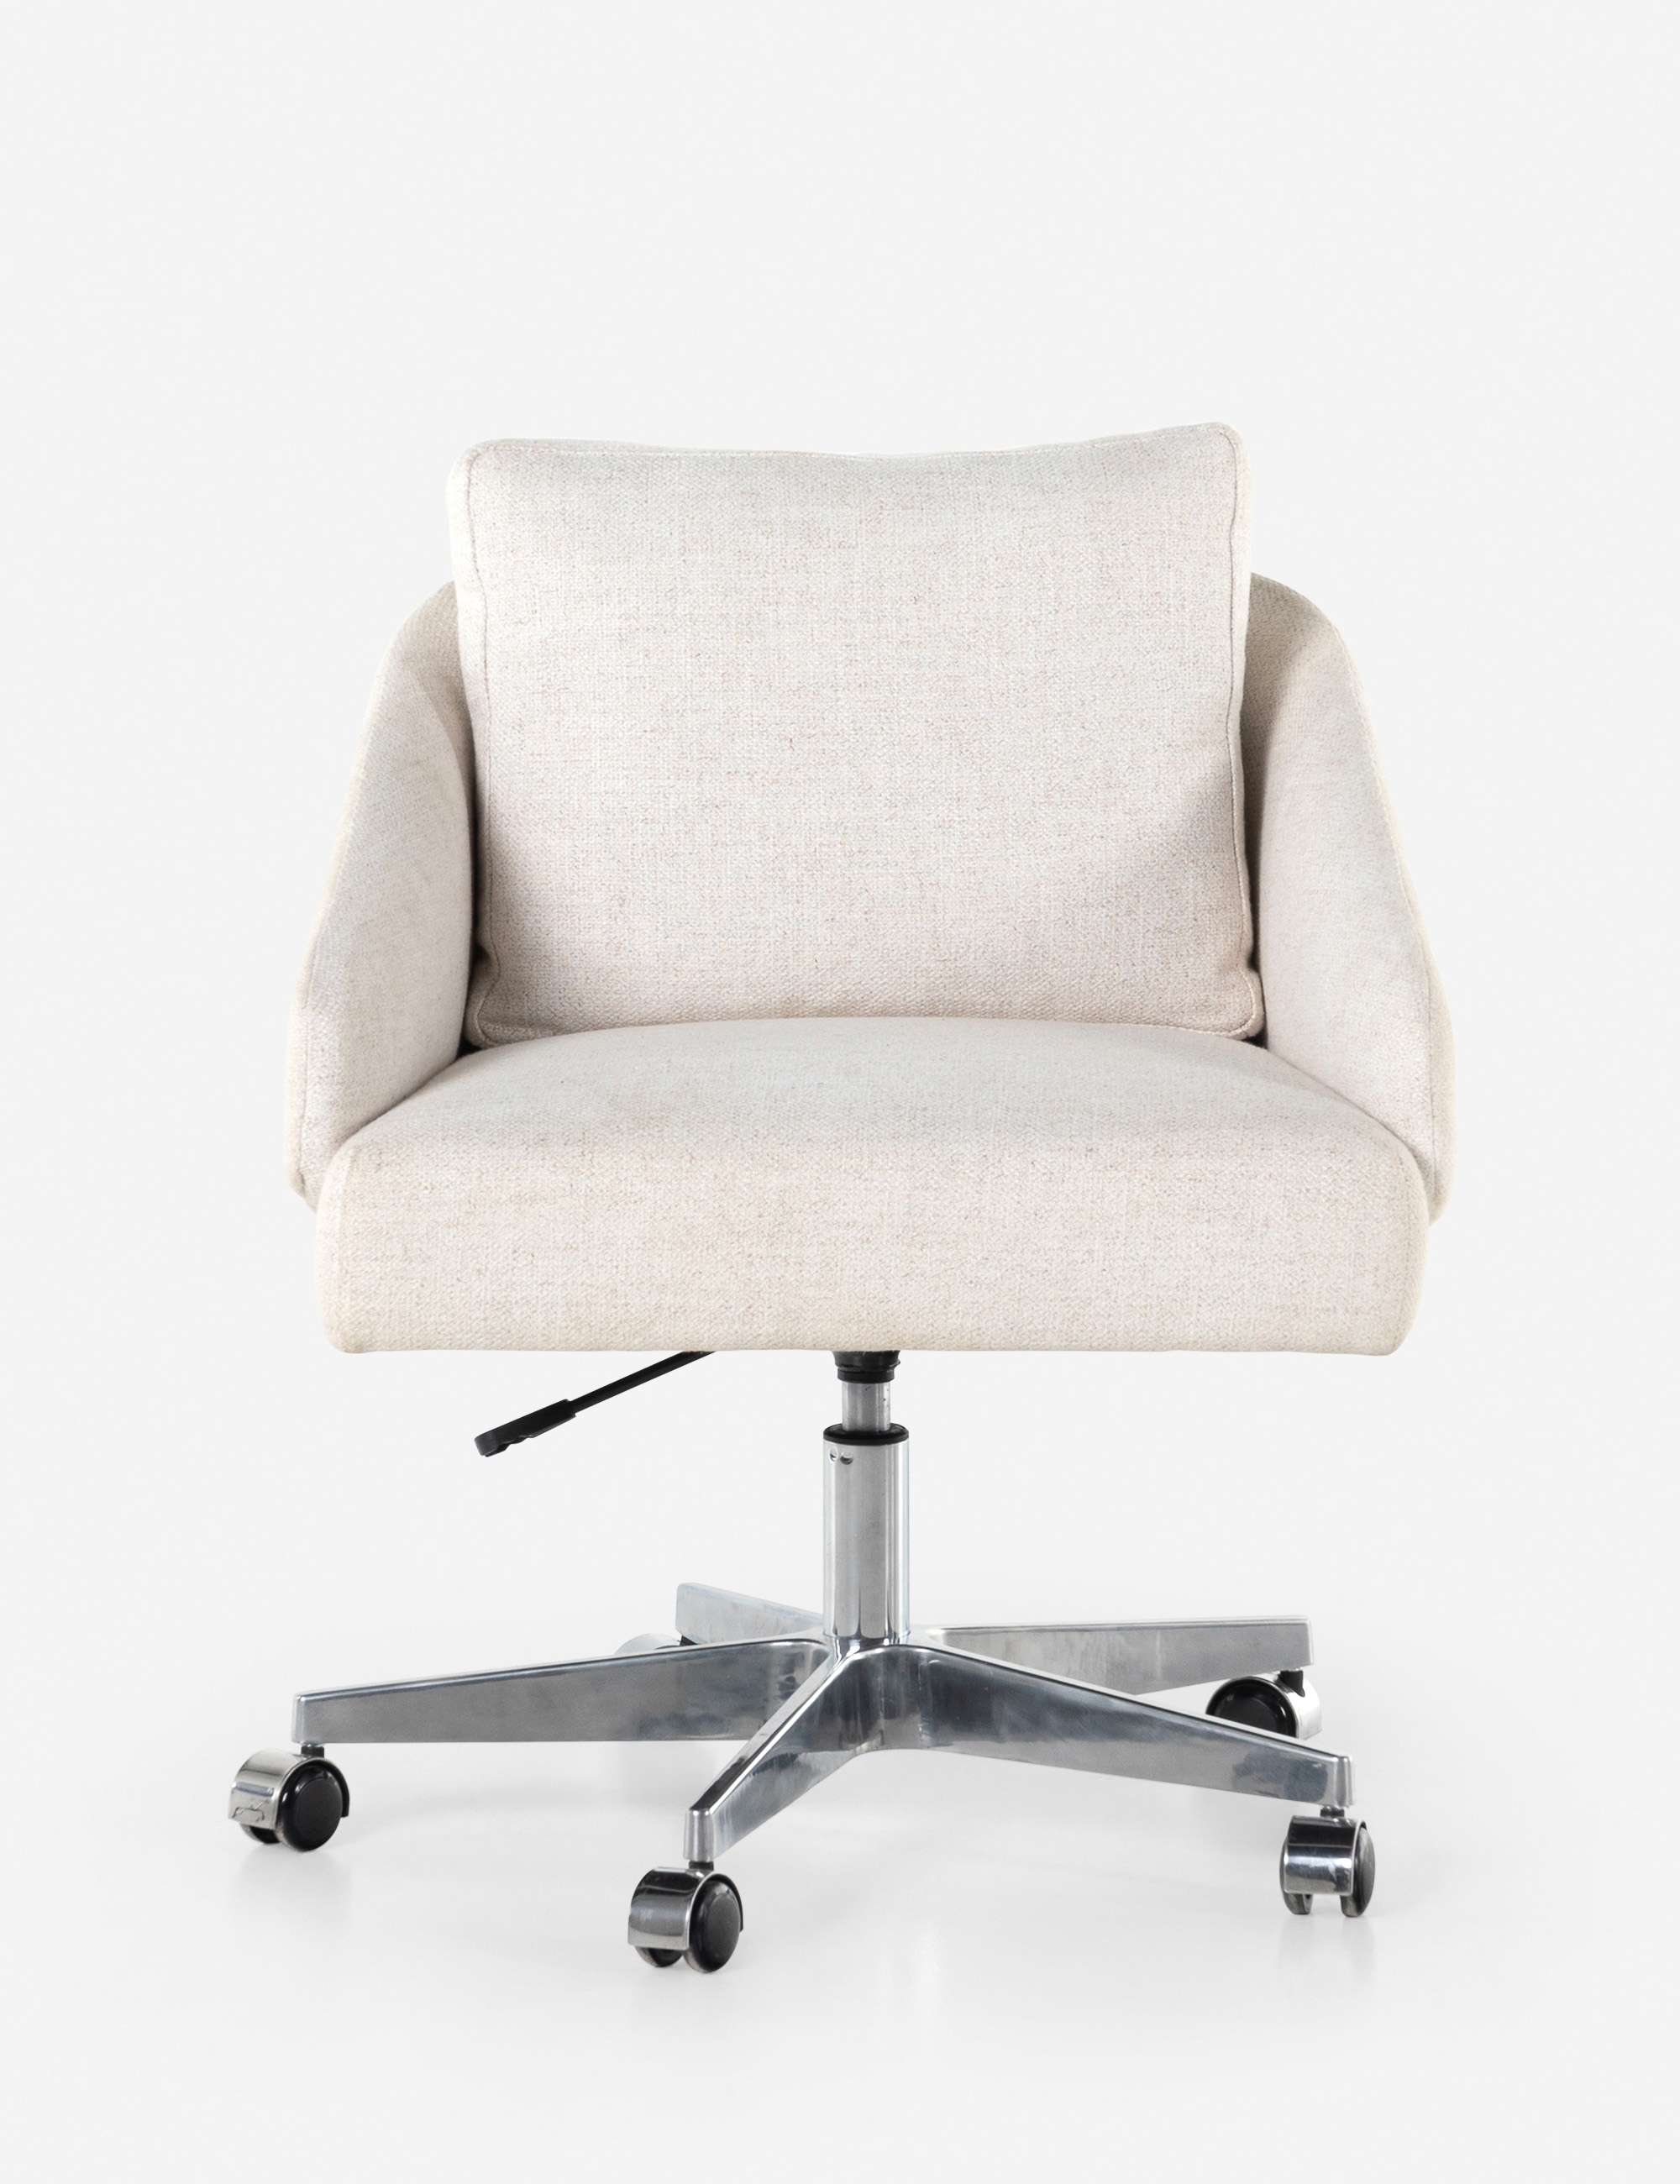 Braeleigh Office Chair - Image 0